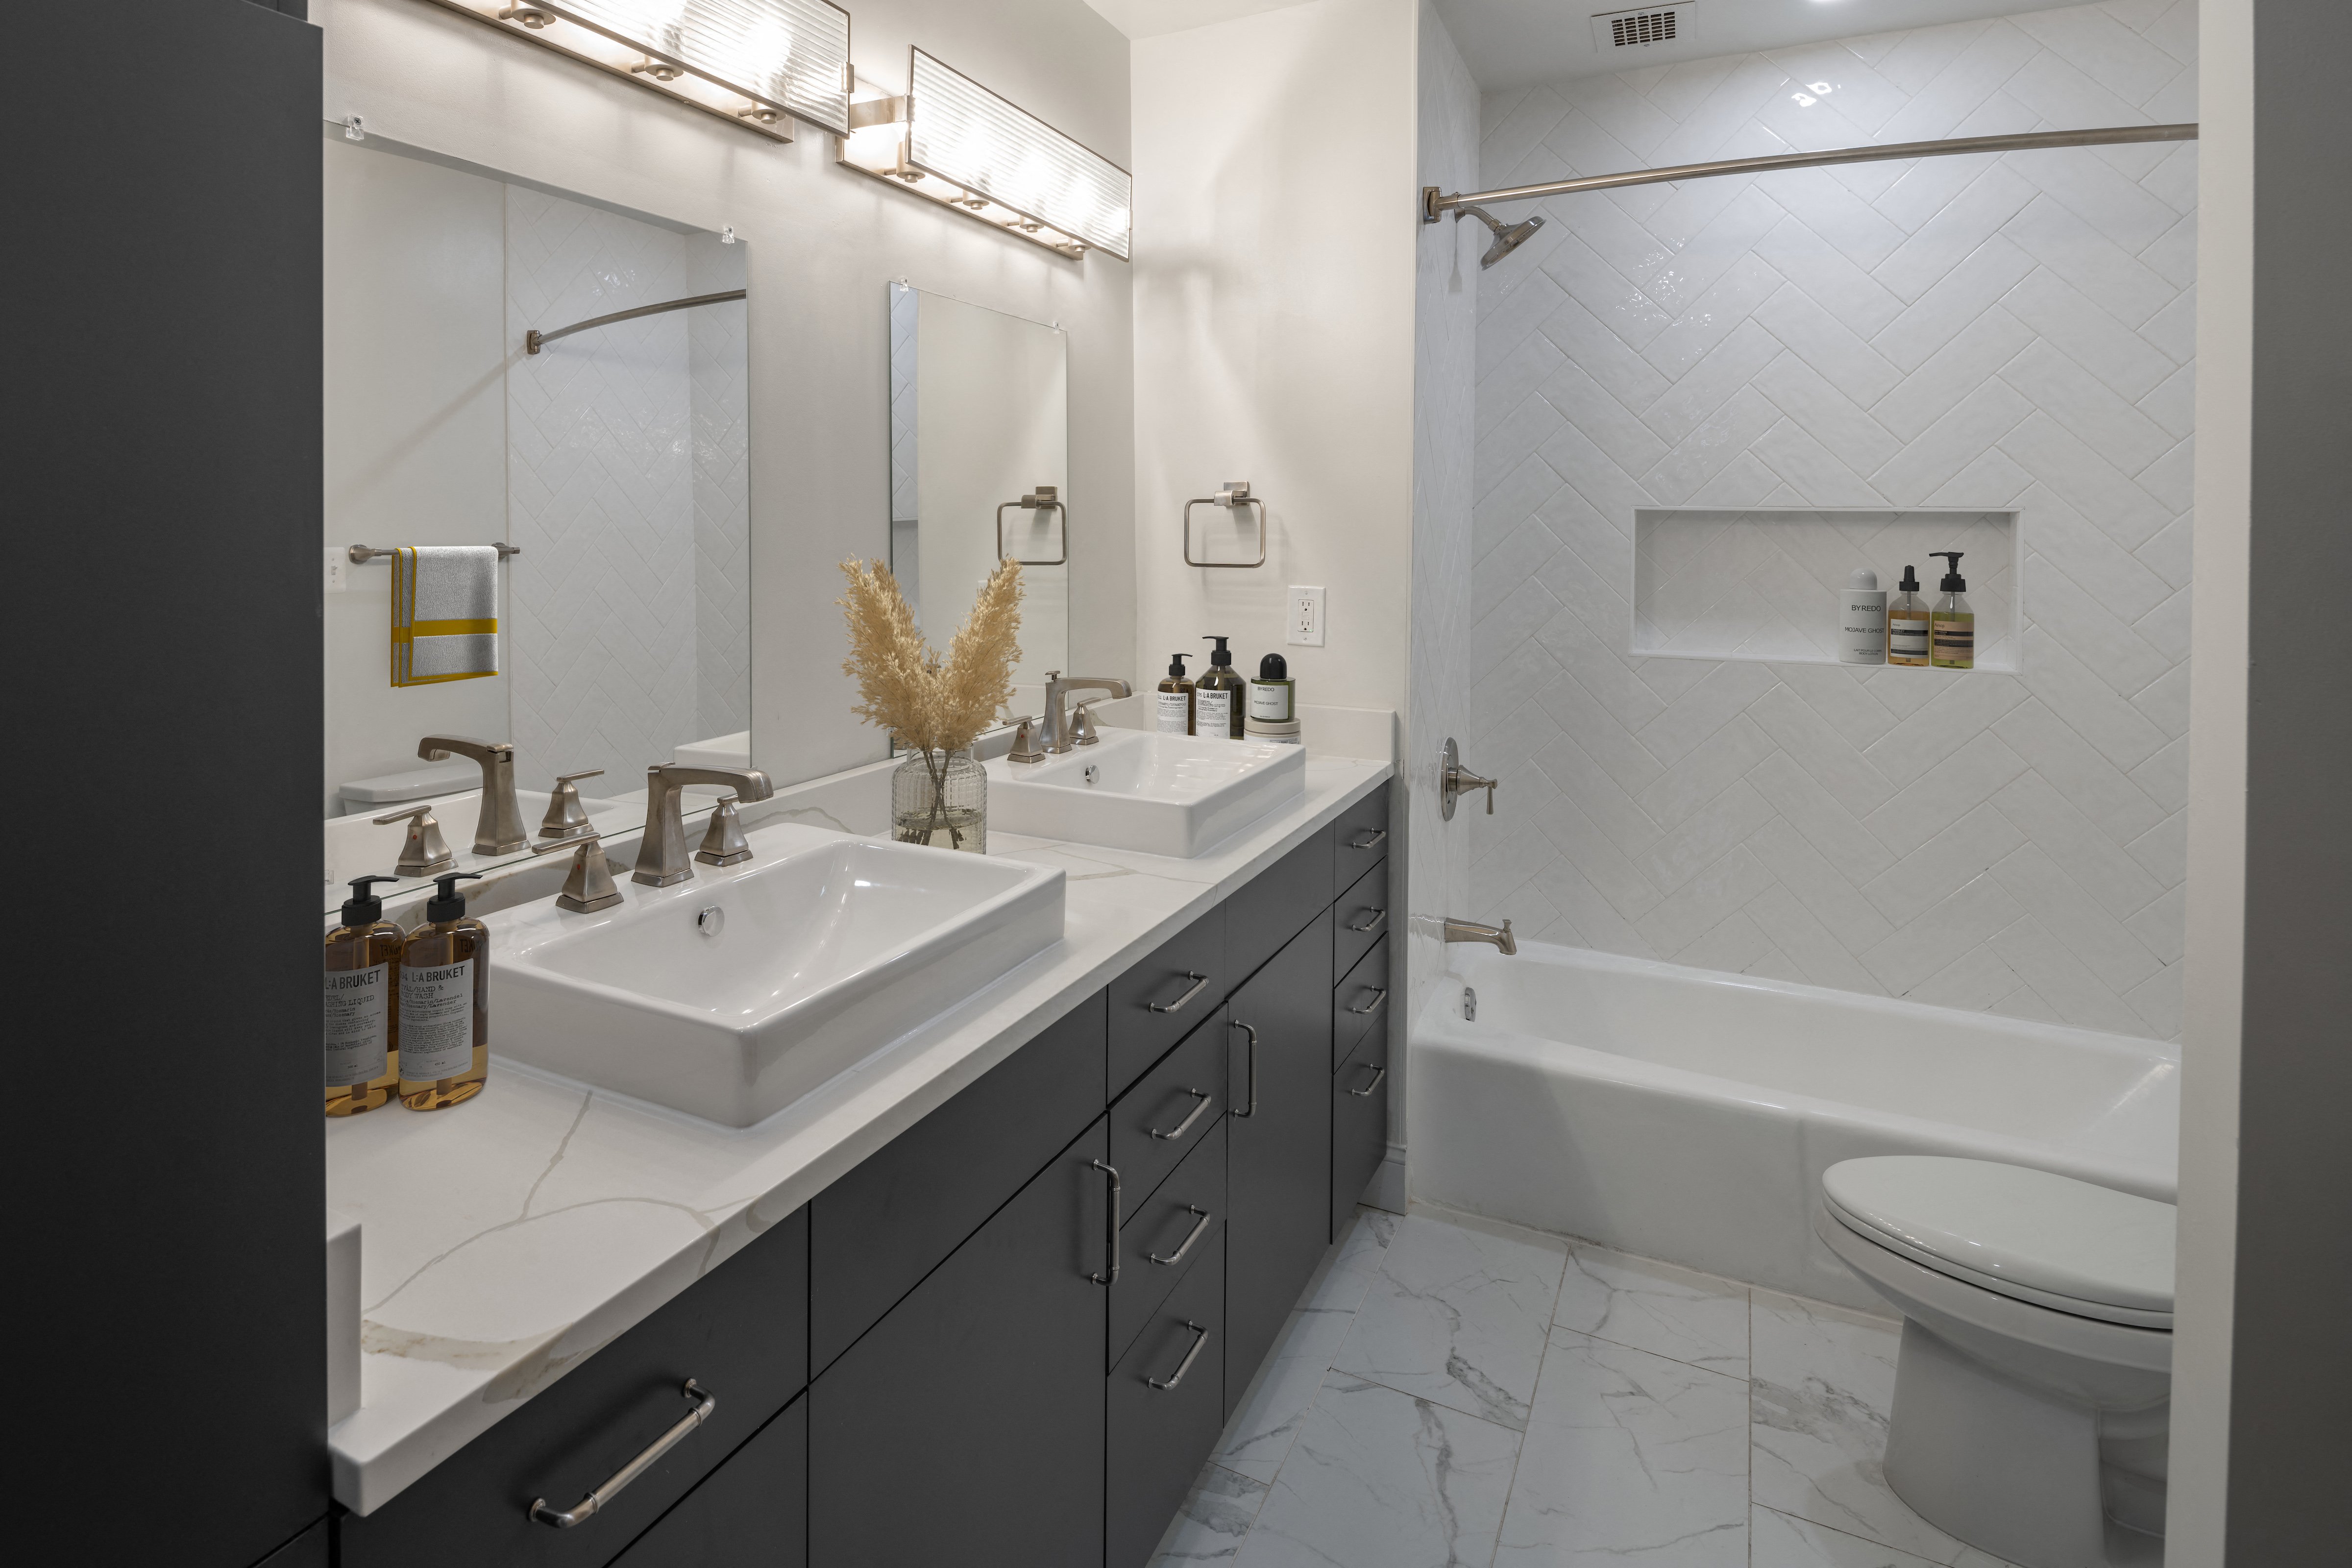 Premium Gold Finish - spa-inspired bathrooms with crafted tile and dual vanity sinks (in select homes)